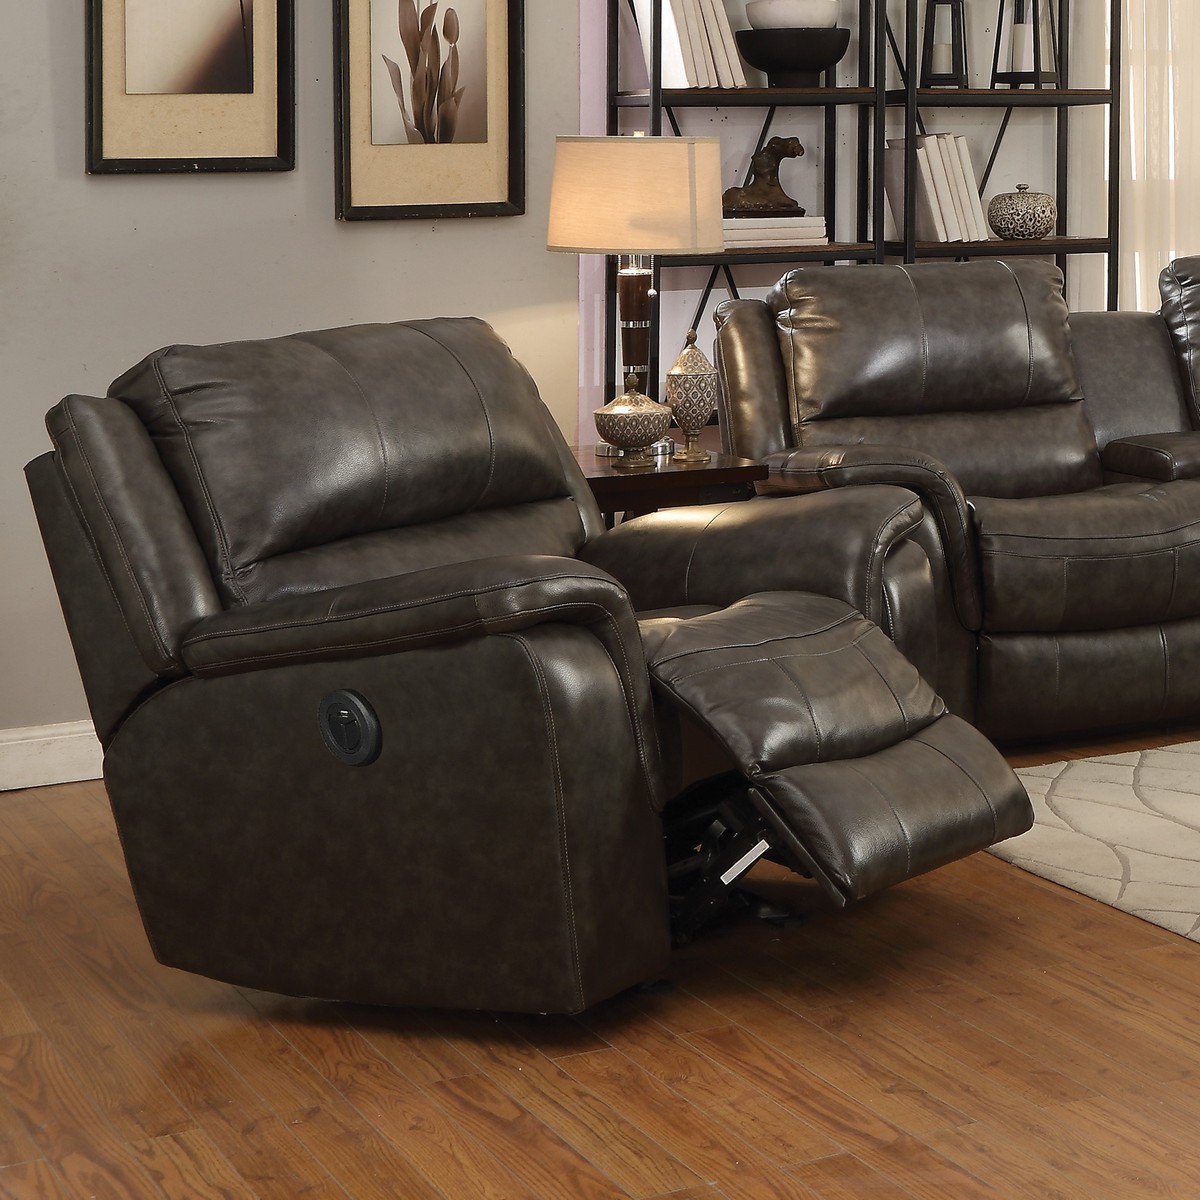 Coaster Wingfield Power Recliner - Two Tone Charcoal